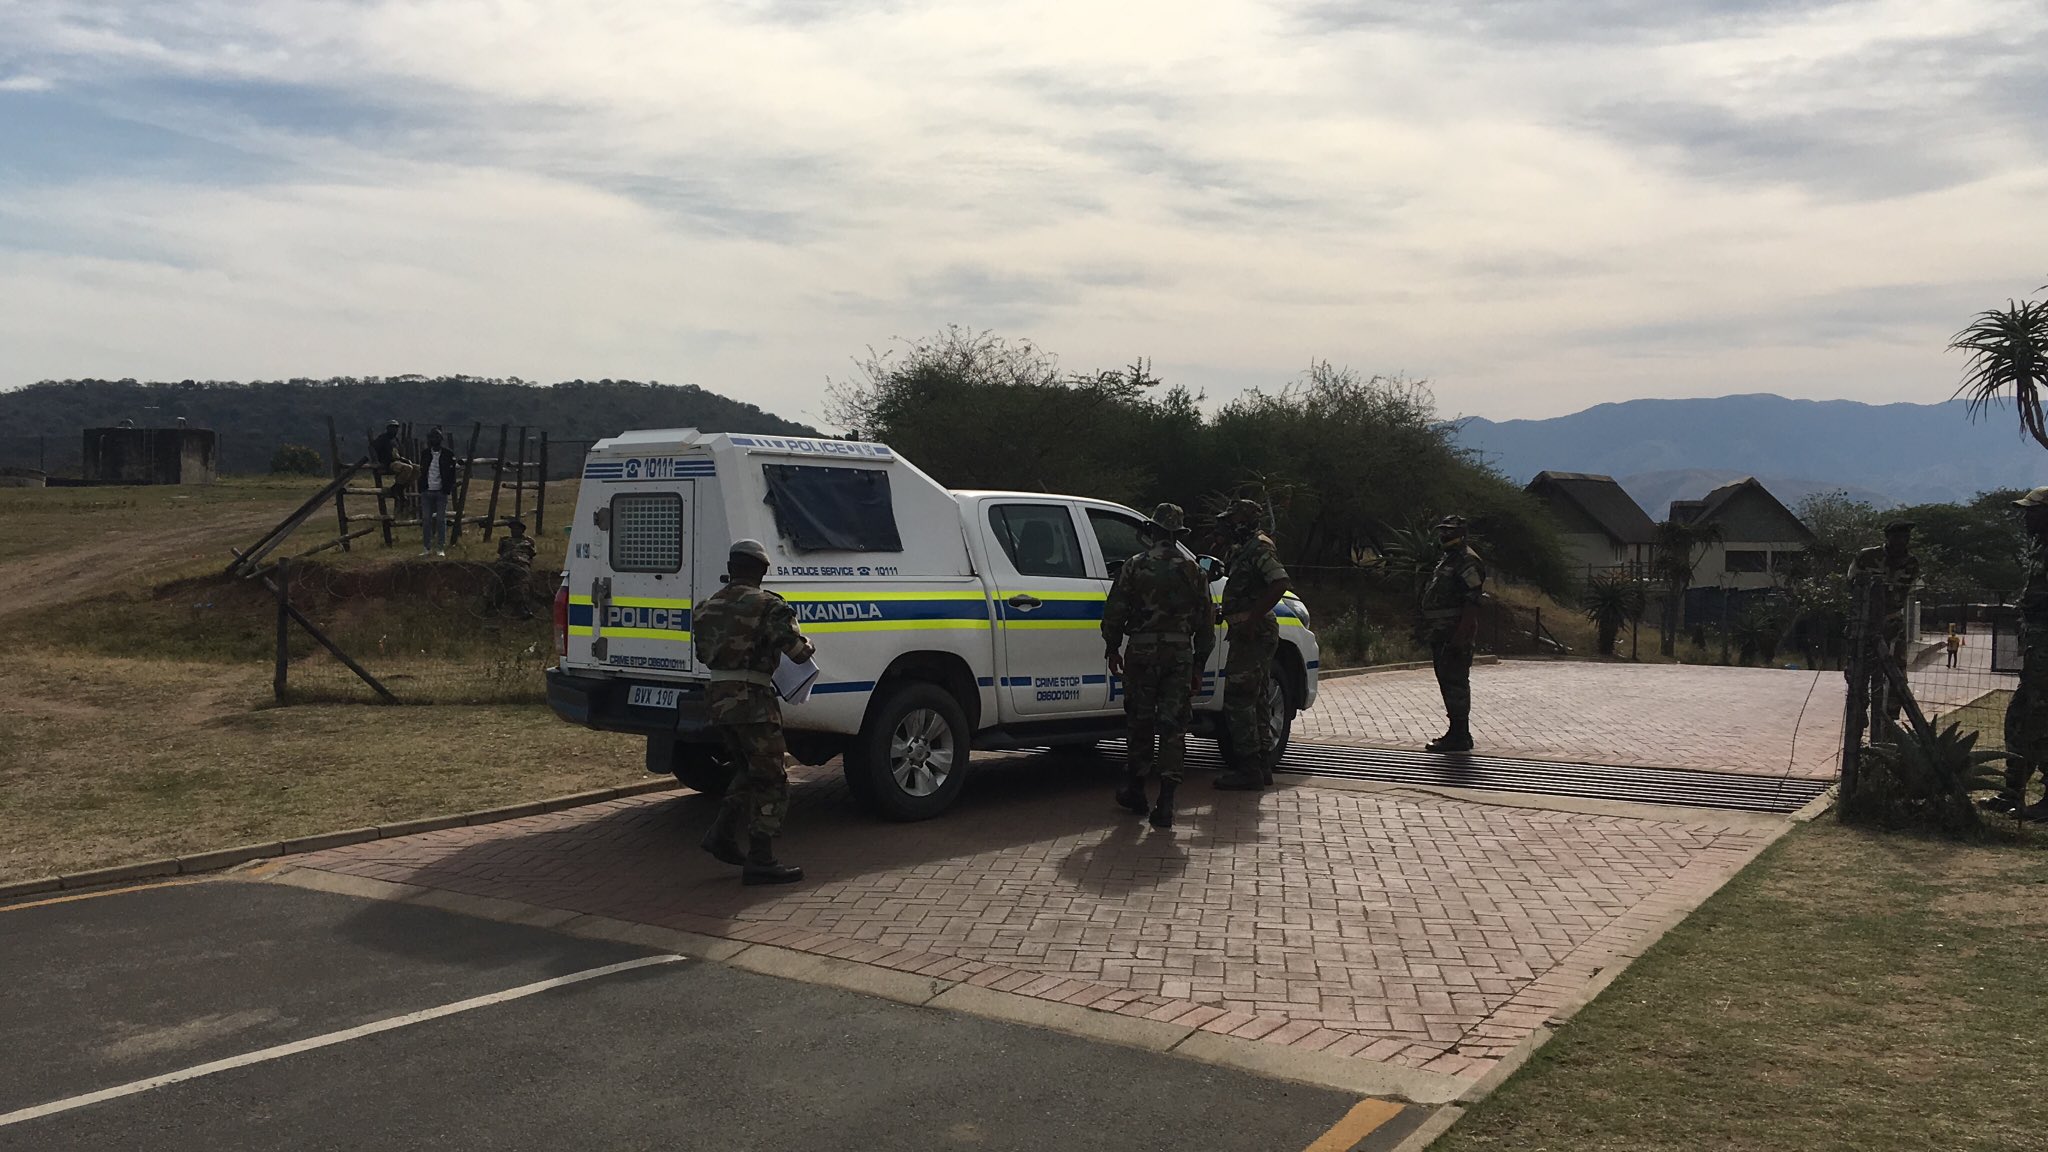 WATCH| MK Soldiers Mobilise For A Fight With Police Amid Reports Zuma Is To Freely Surrender Himself To Police